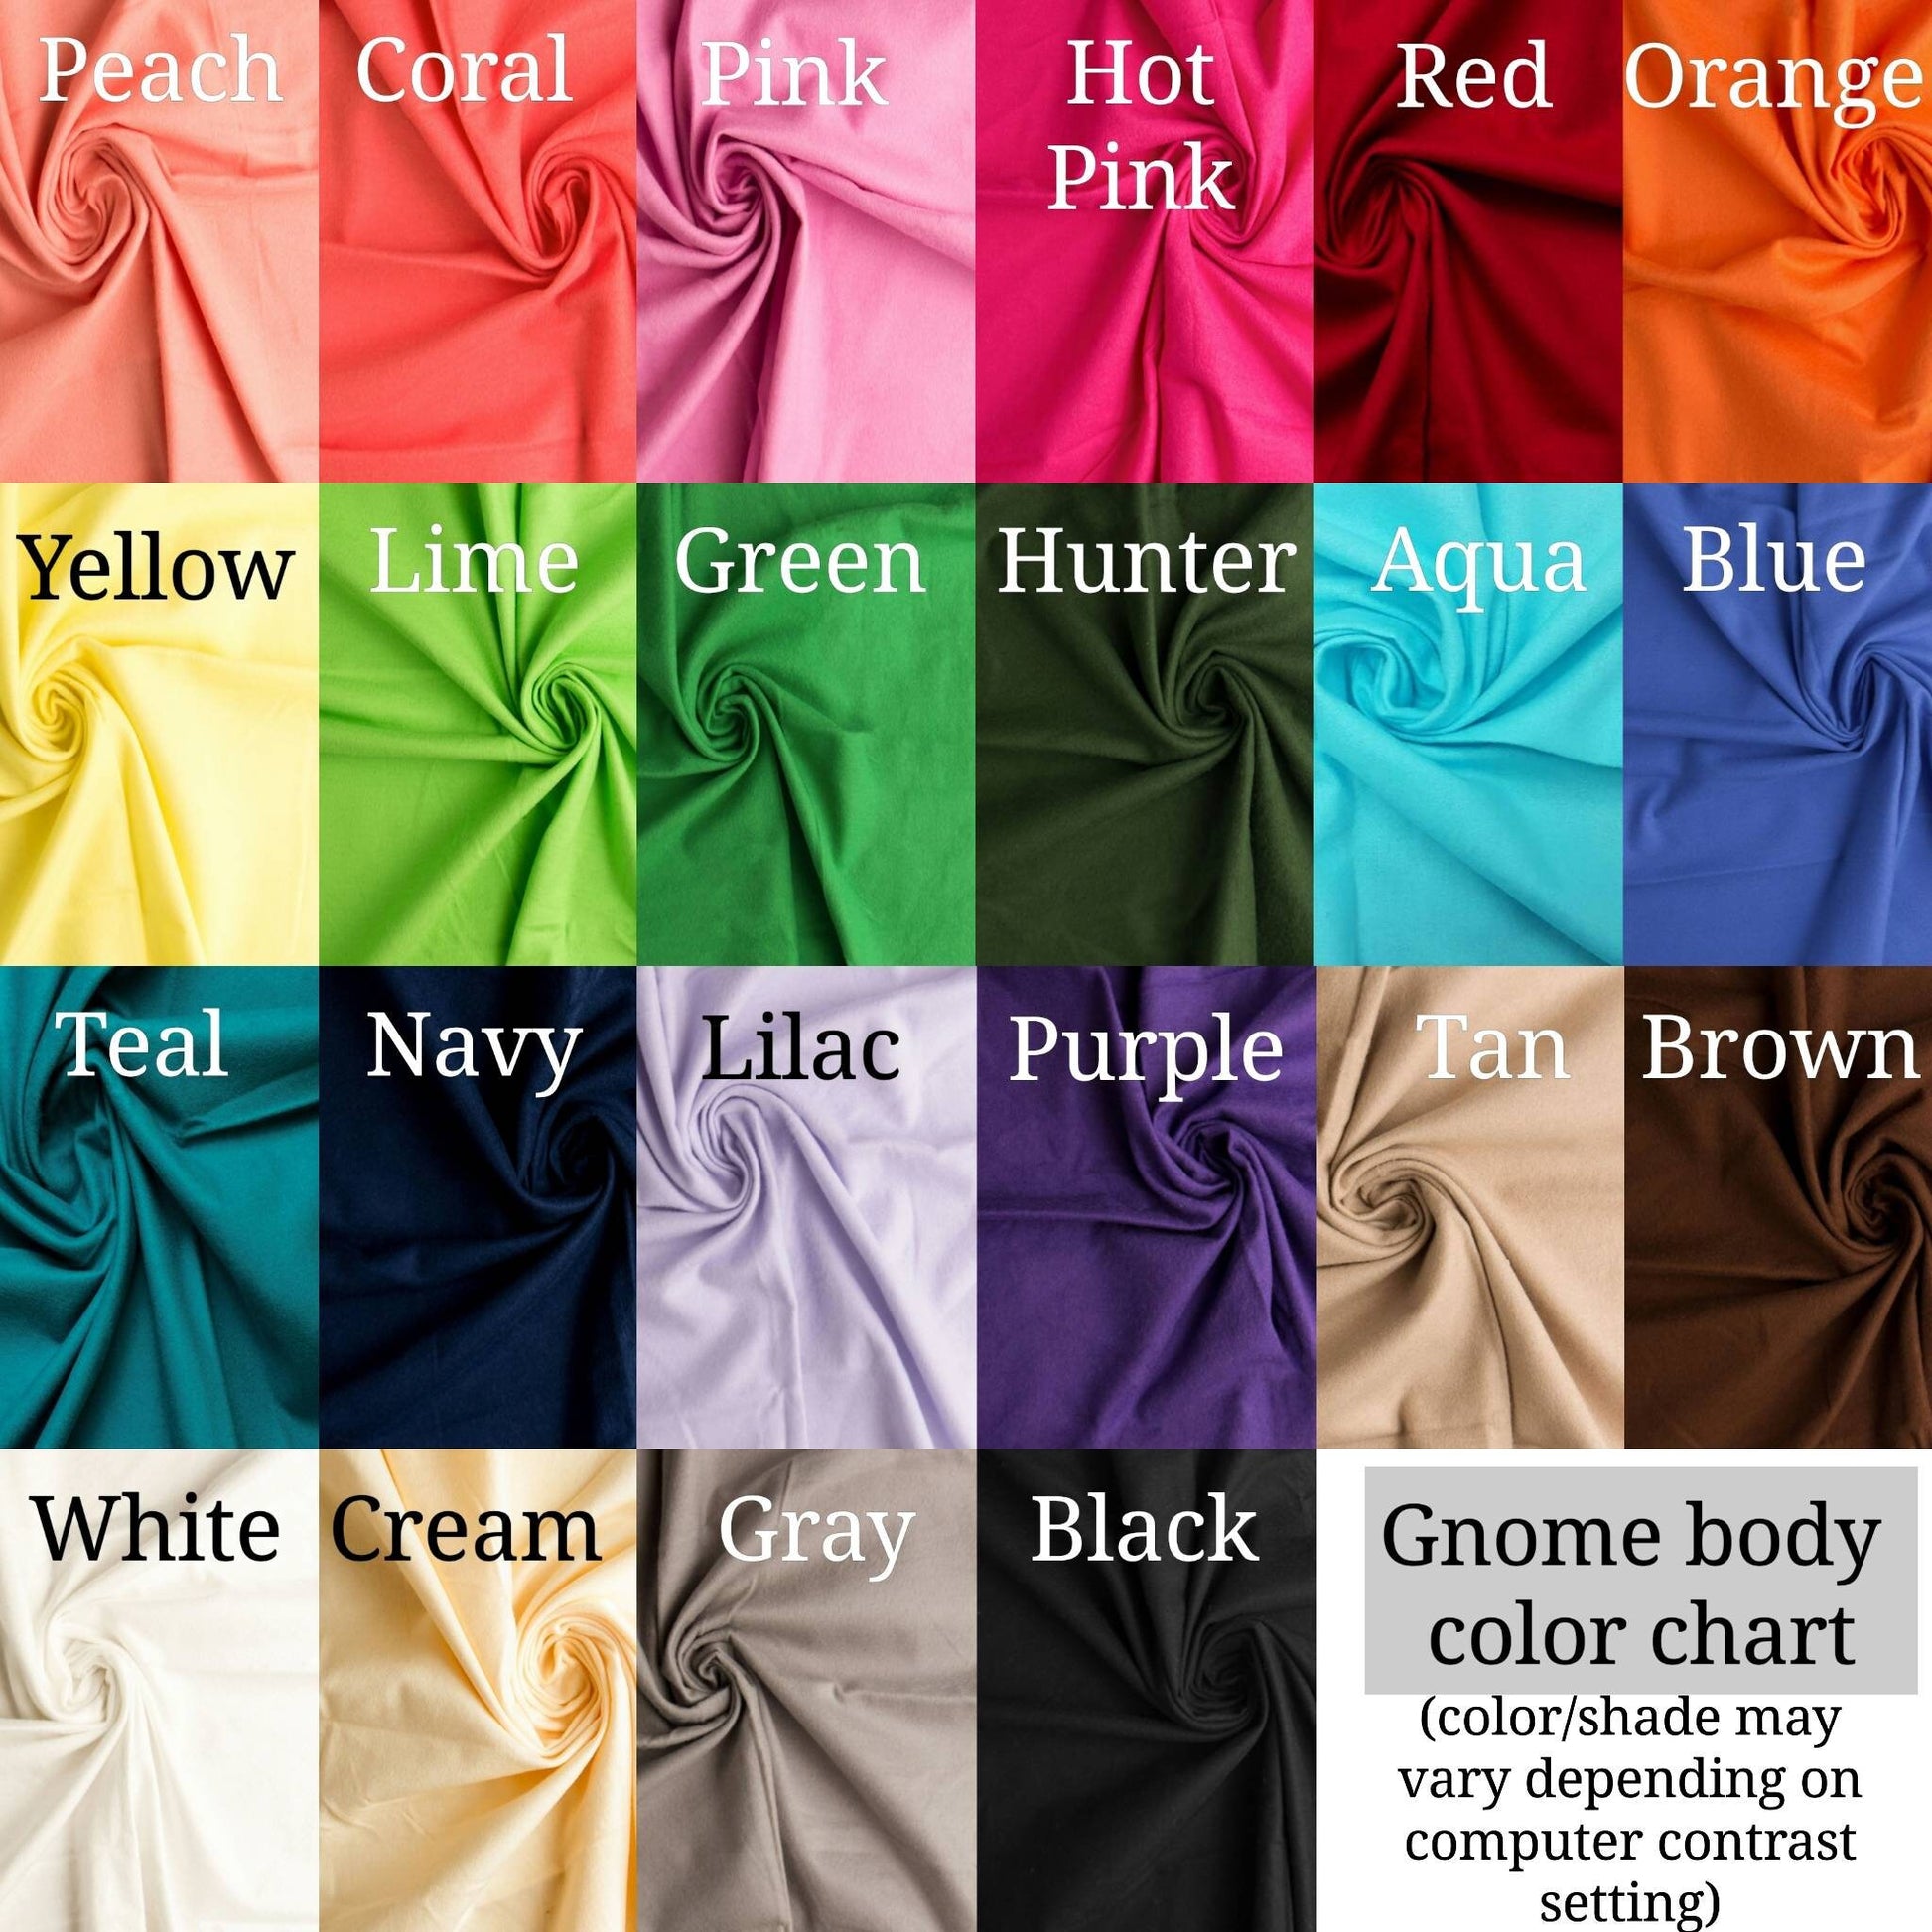 color chart for variety of color options available.